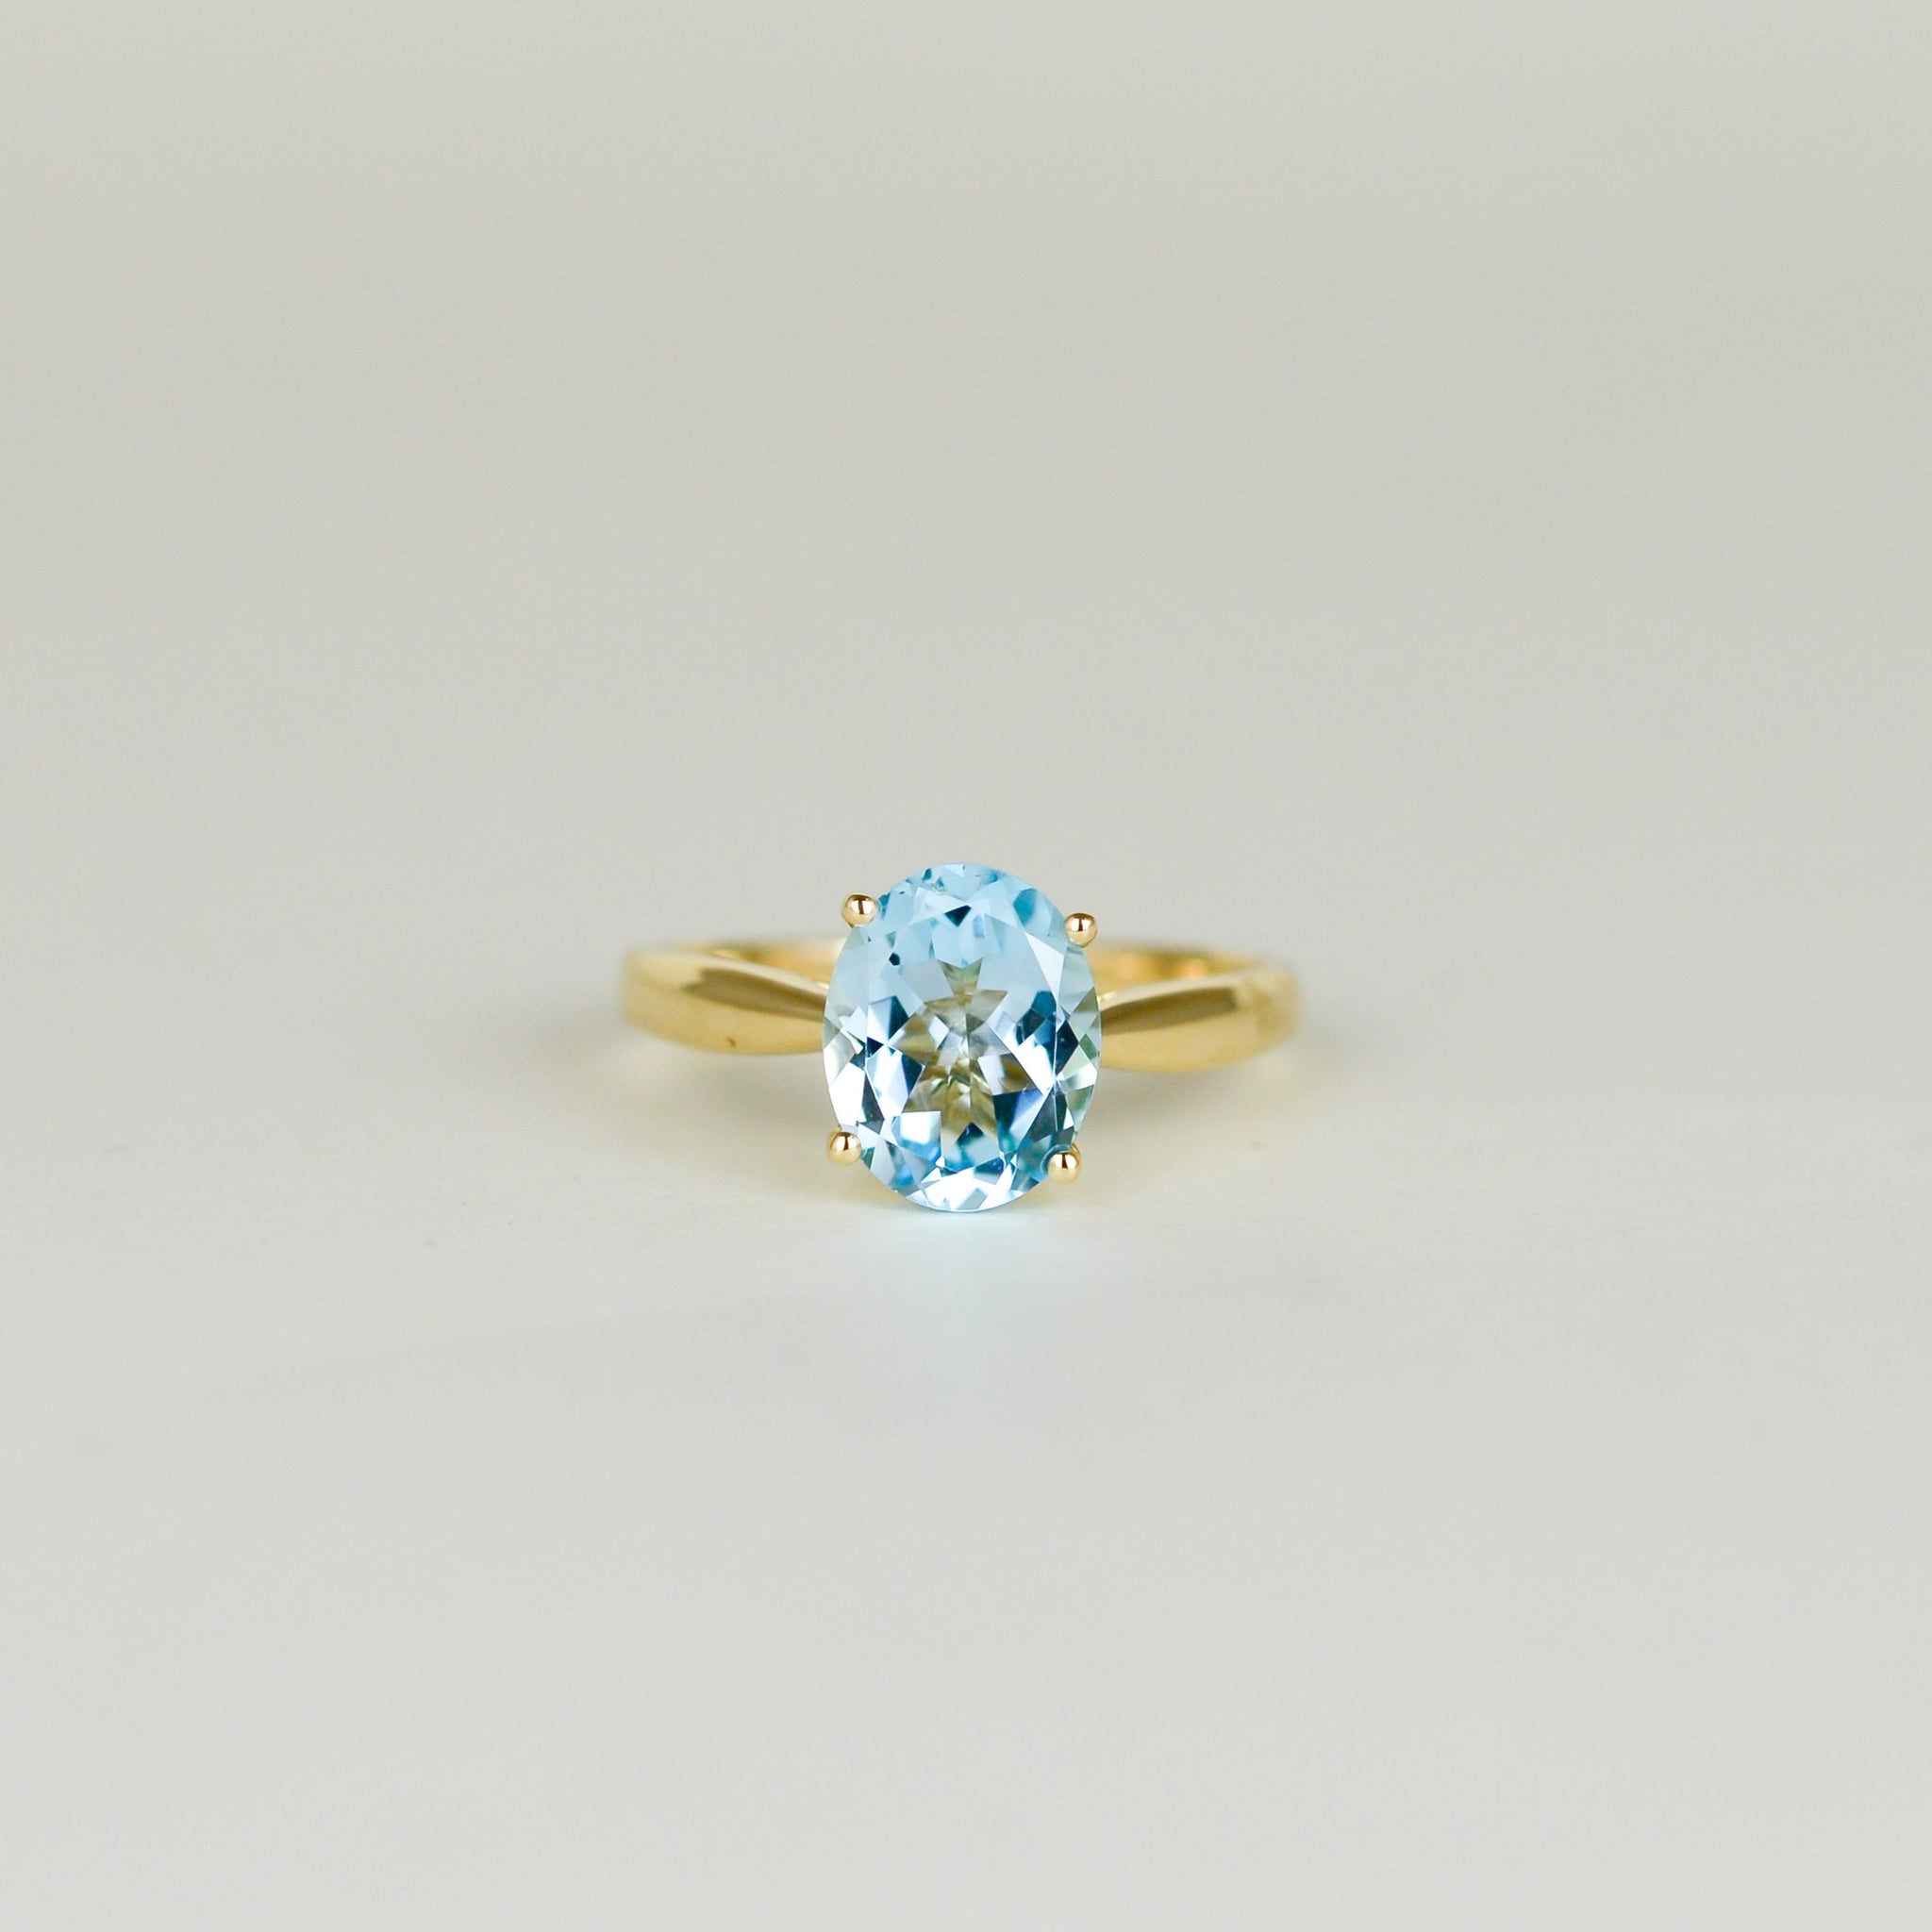 9ct Yellow Gold 2.74ct Oval Blue Topaz Ring